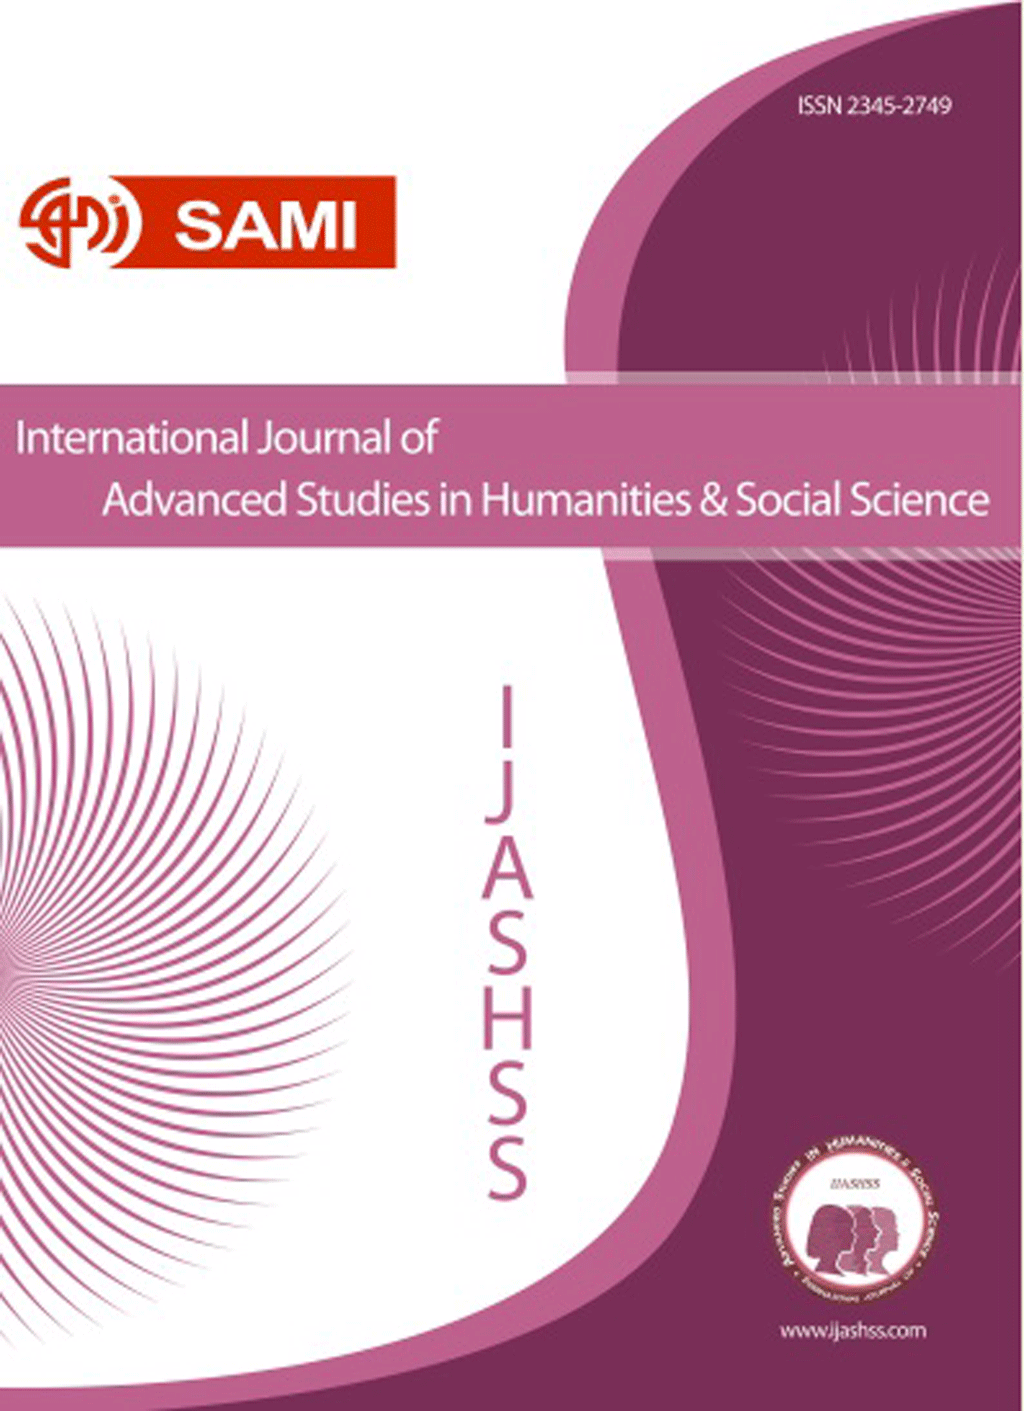 International Journal of Advanced Studies in Humanities and Social Science - January 2013, Volume 2 -  Issue 1